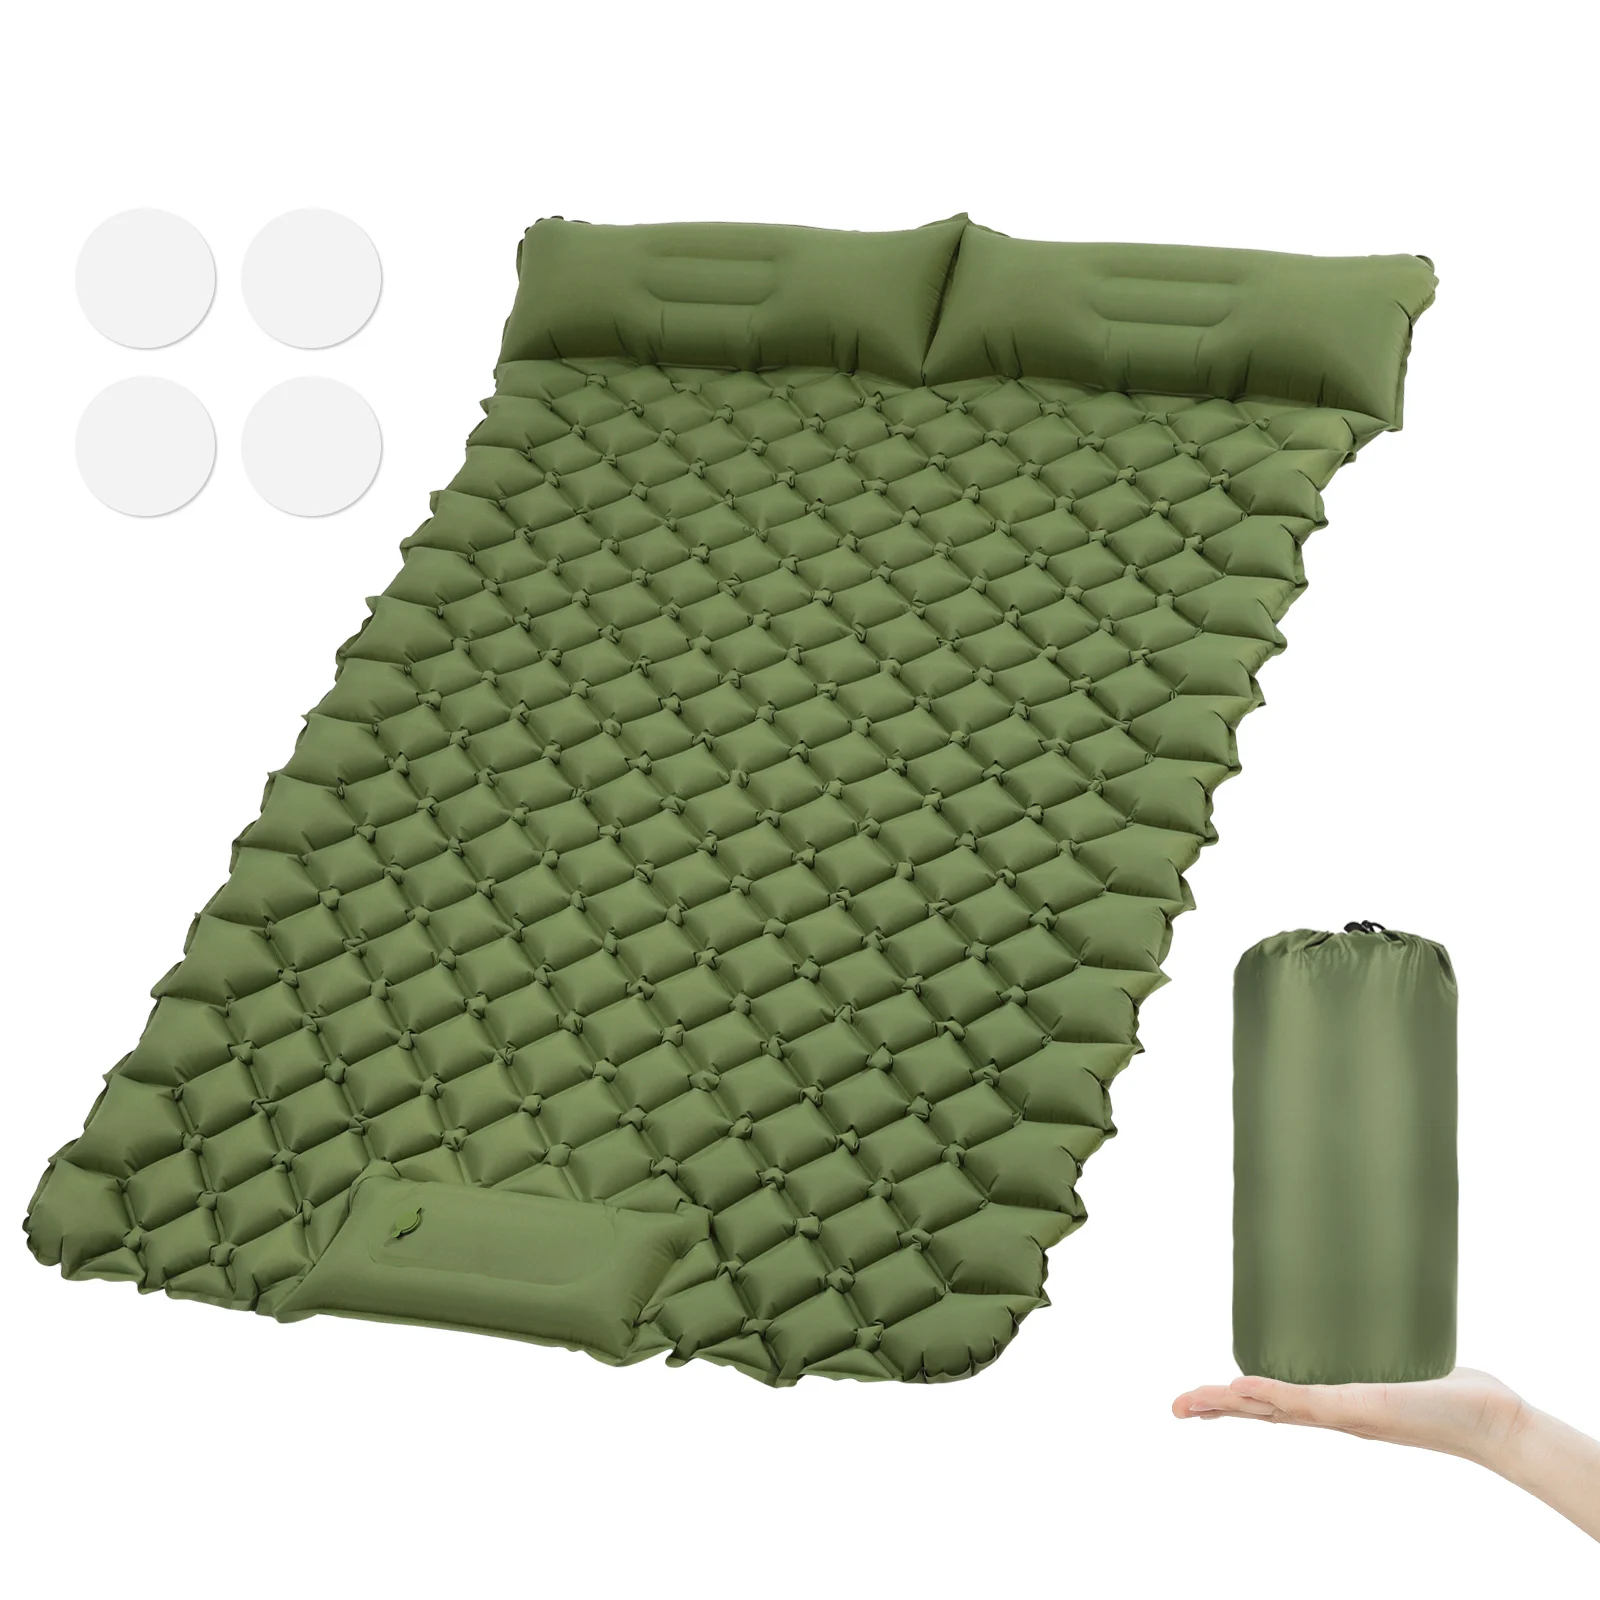 Outdoor camping Sleeping mat cozy double with pillow inflatable mattress widening tent sleeping pad suitable wild camping trips